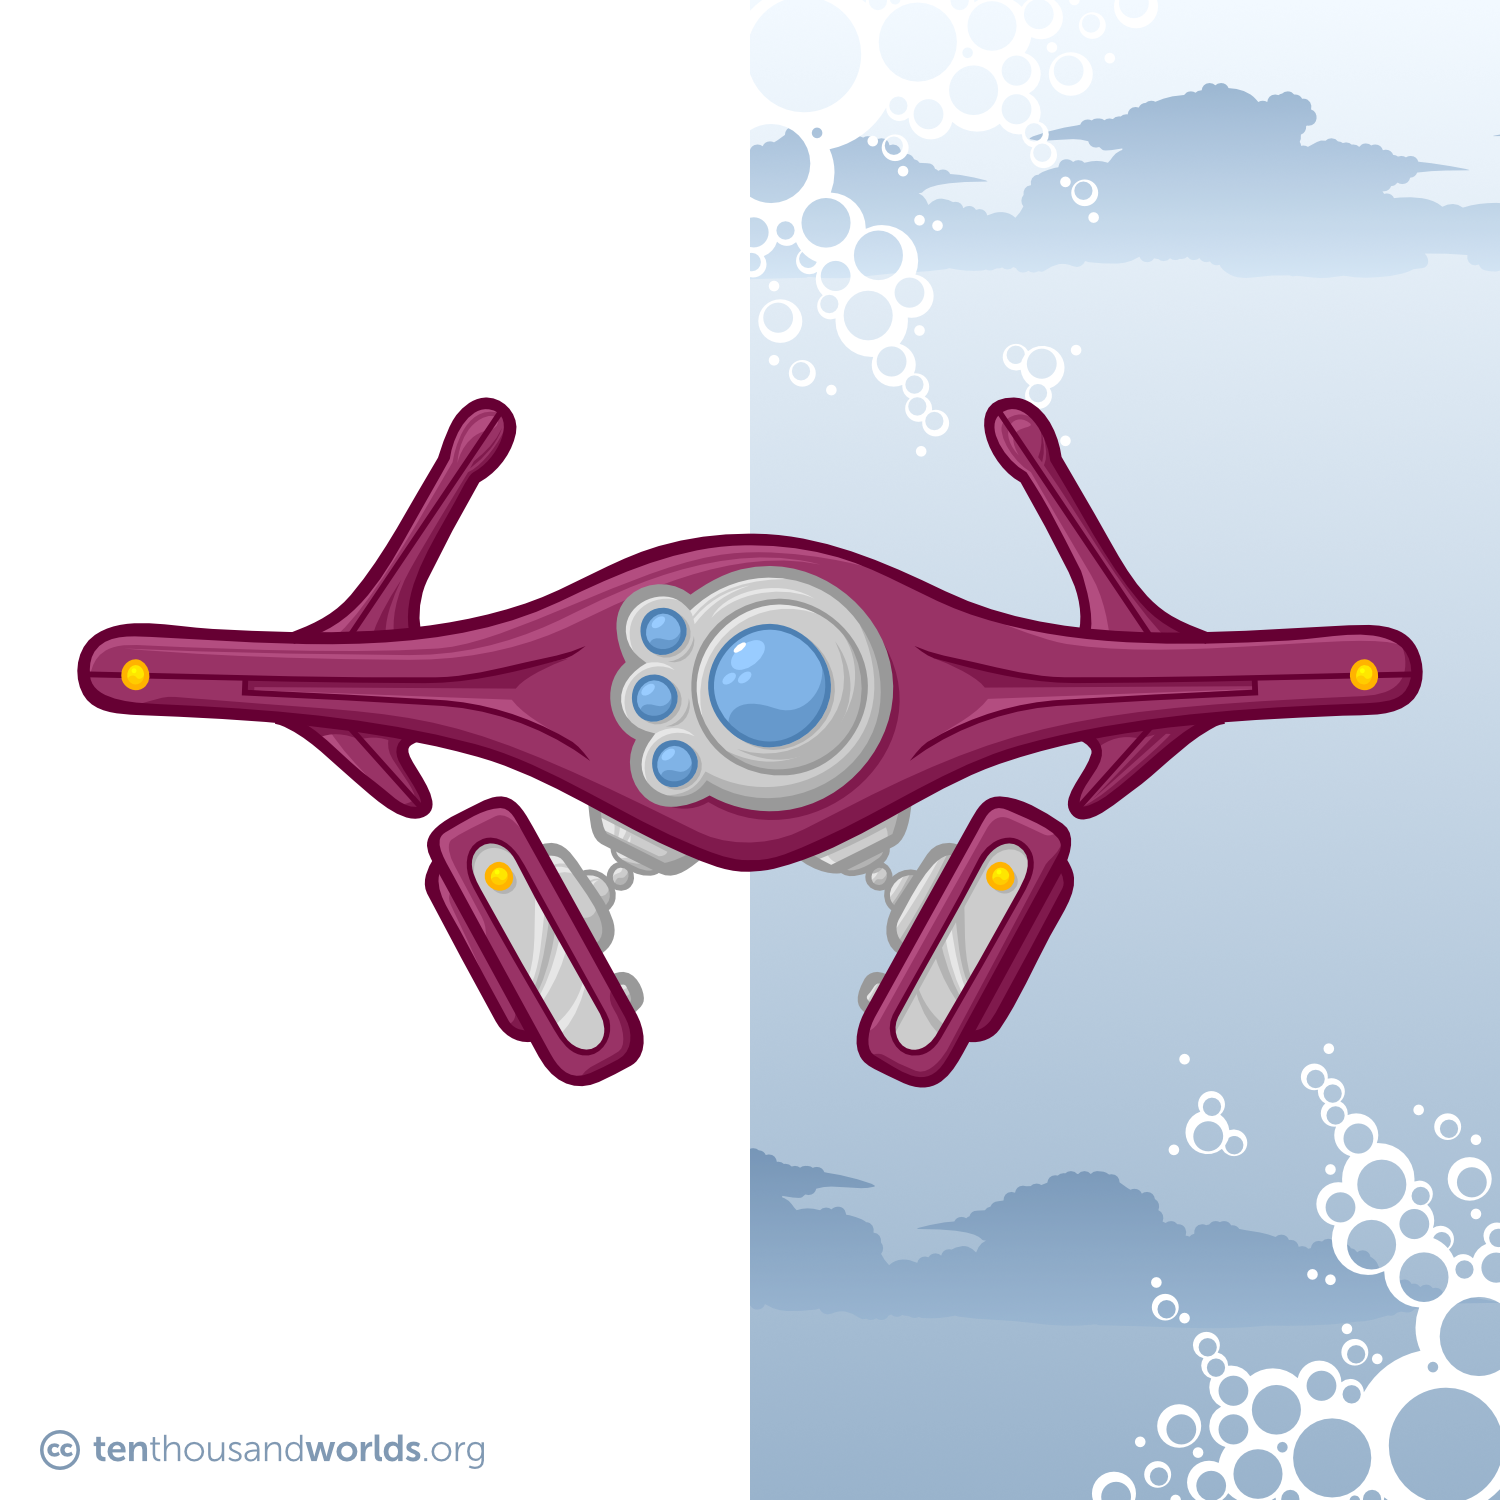 A flying delta-wing-shaped robot in maroon and chrome, seen edge-on, from the front. The center bulges out to hold a cluster of camera eyes reflecting the sky. Halfway along each side, a short fin projects down while a larger fin projects up. Two rectangular guns are slung under the center of the wing by a pair of articulated arms.